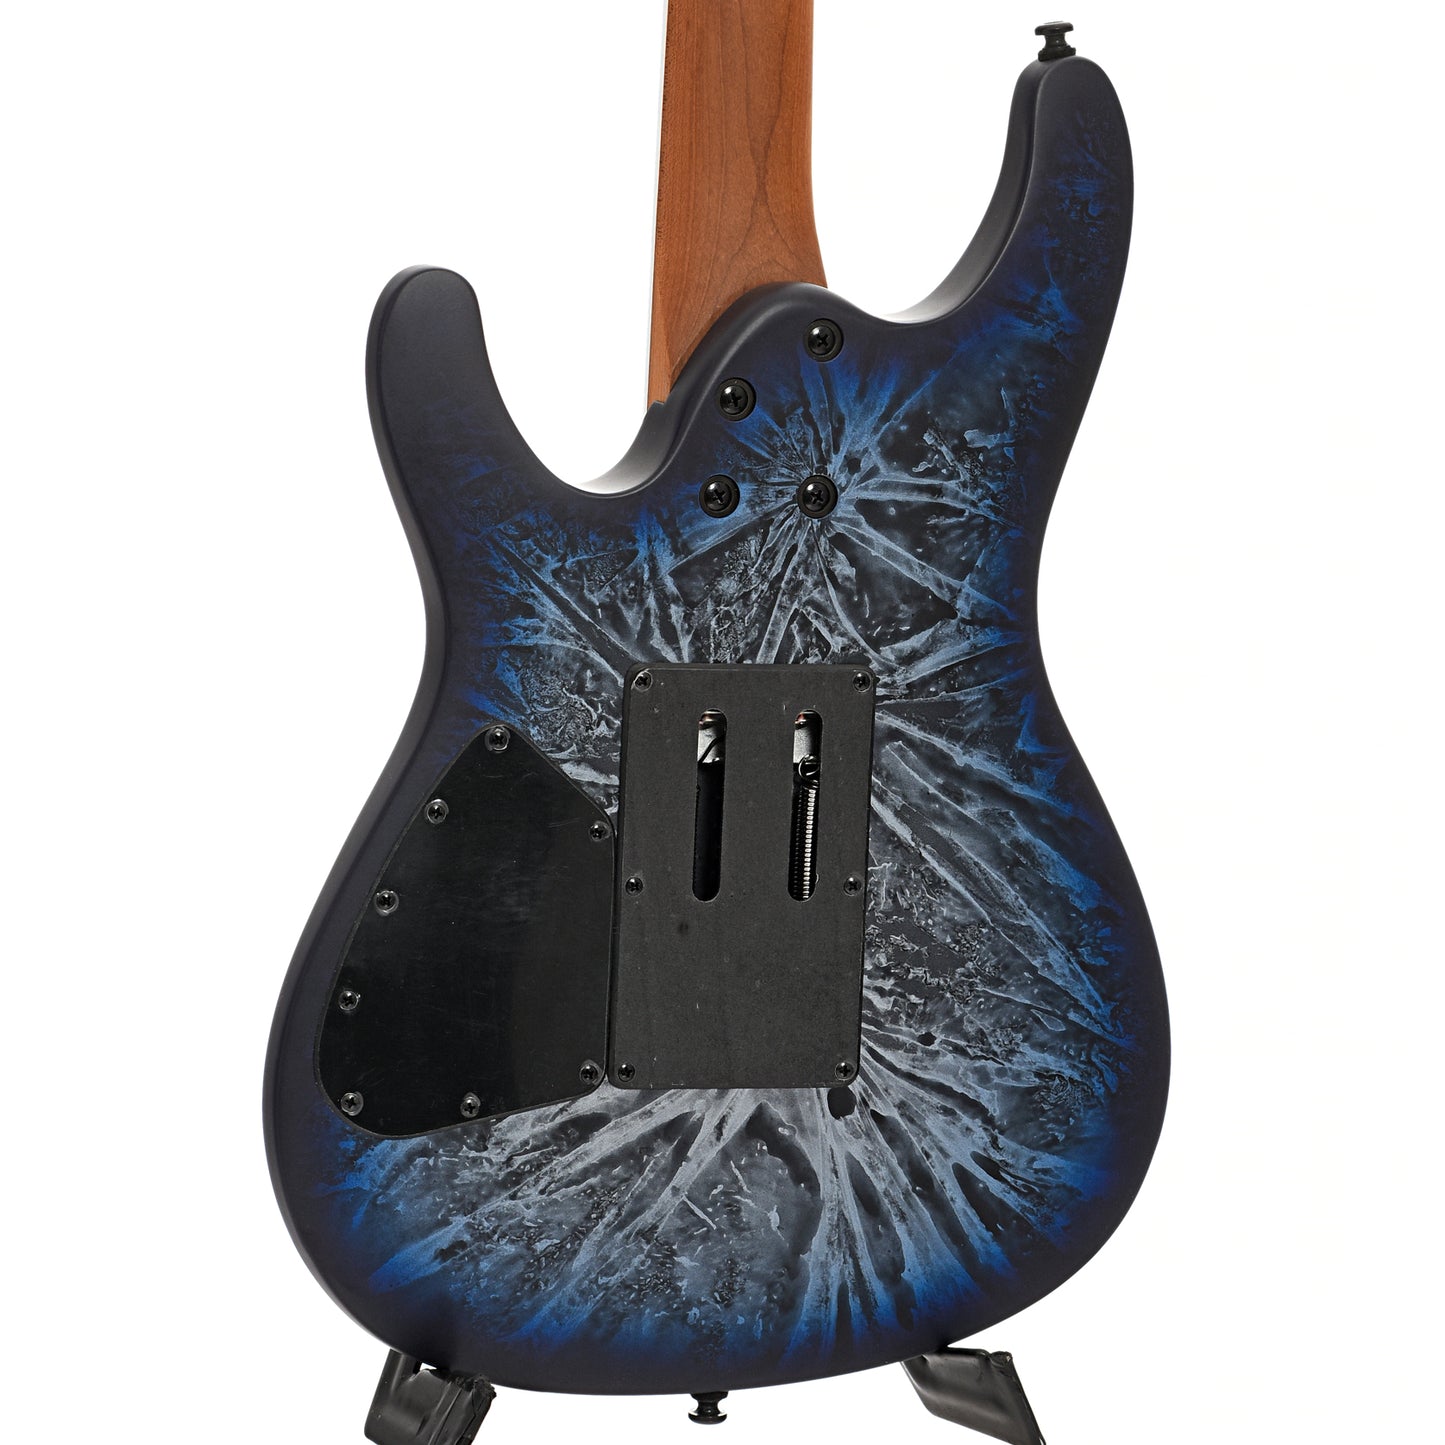 Back and side of Ibanez B-Stock S770 Electric Guitar, Cosmic Blue Frozen Matte